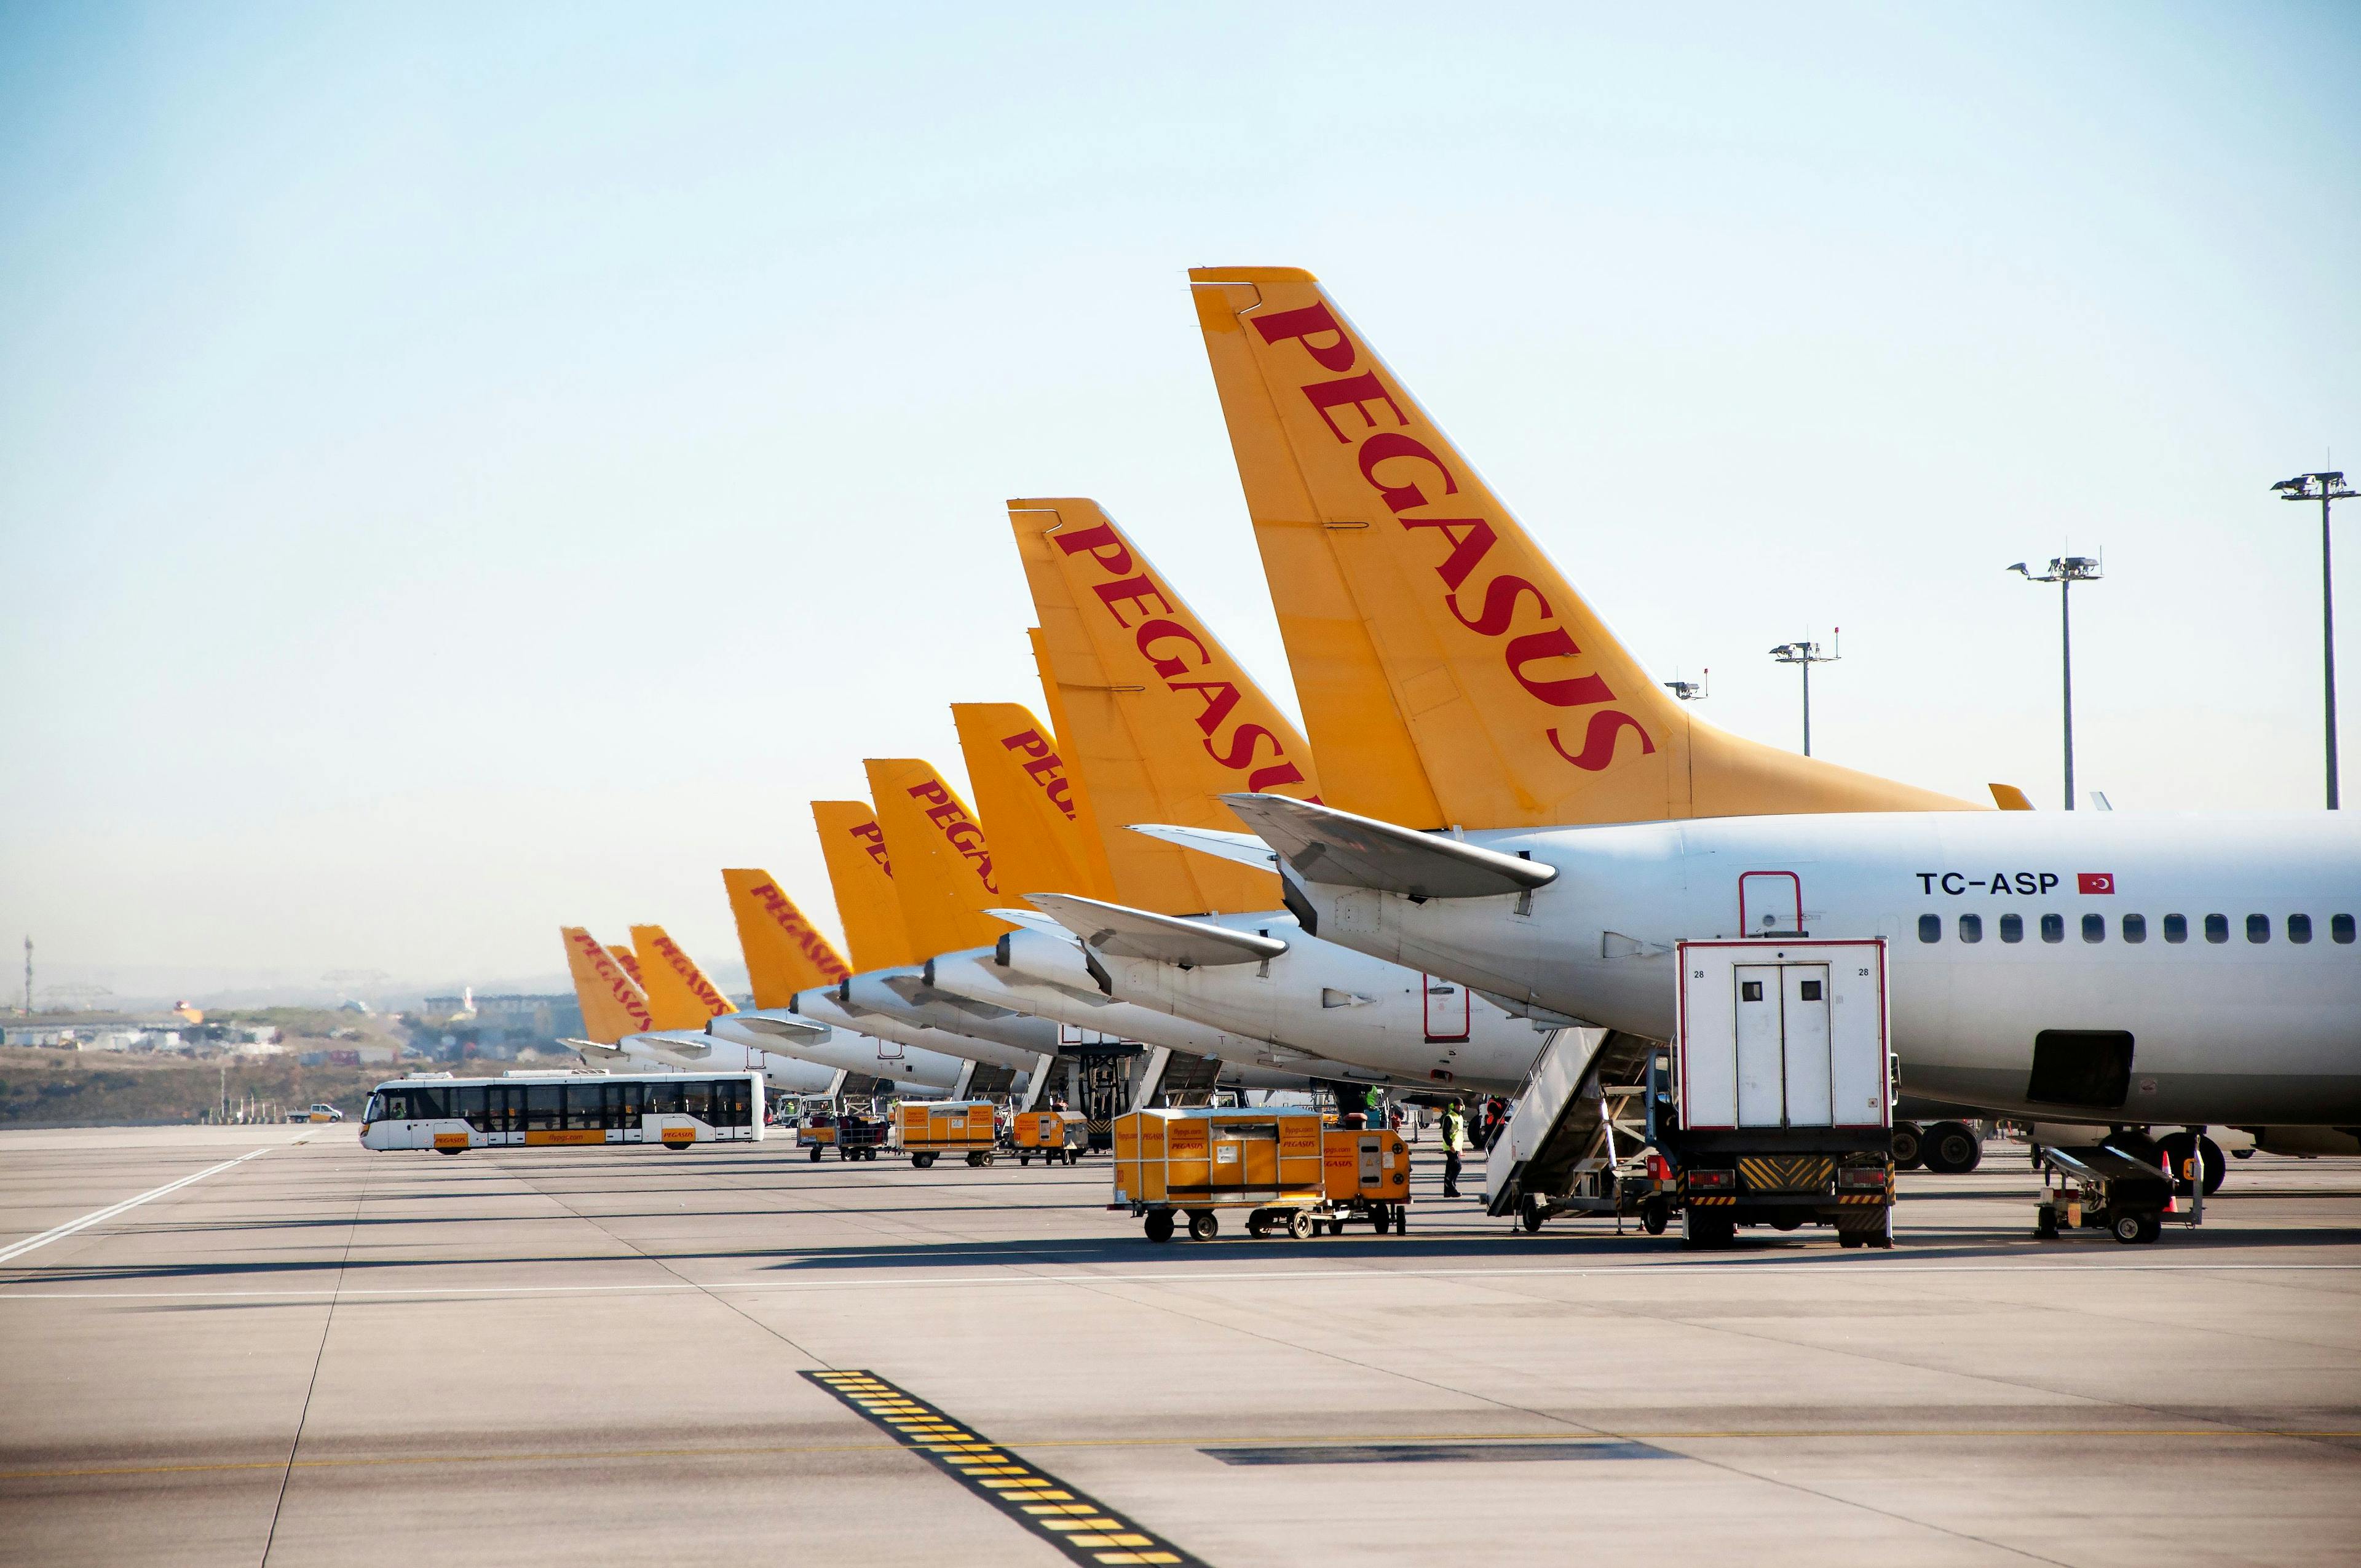 Europe’s Budget-Friendly Airlines You Need to Know - pegasus airlines - turkey - low-budget airlines - ratepunk